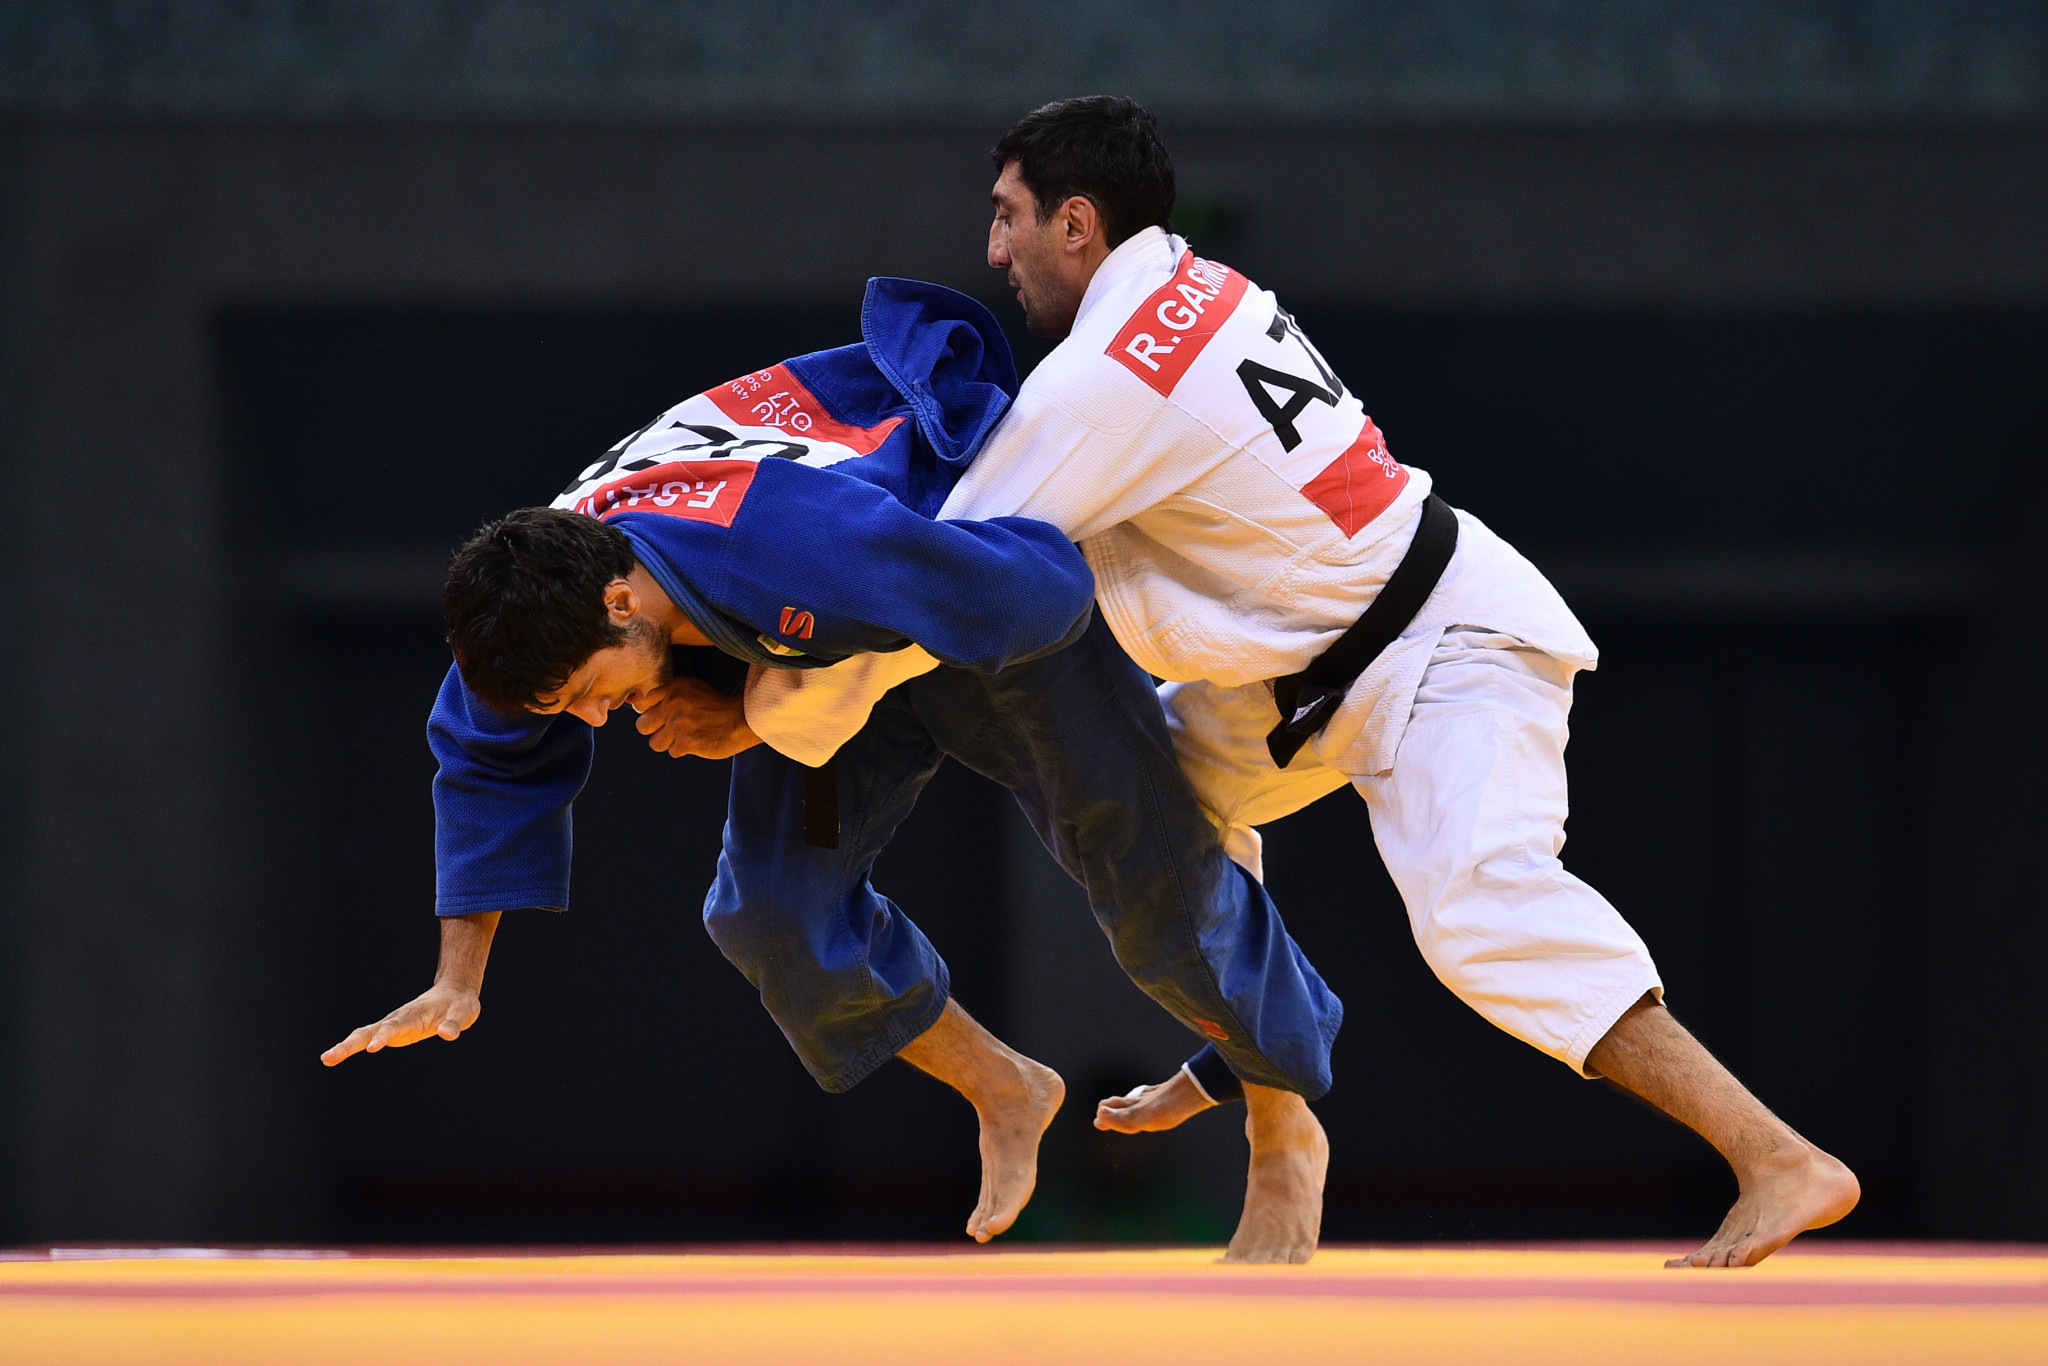 Judo will feature as a fully competitive sport at the European Para Youth Games ©Getty Images